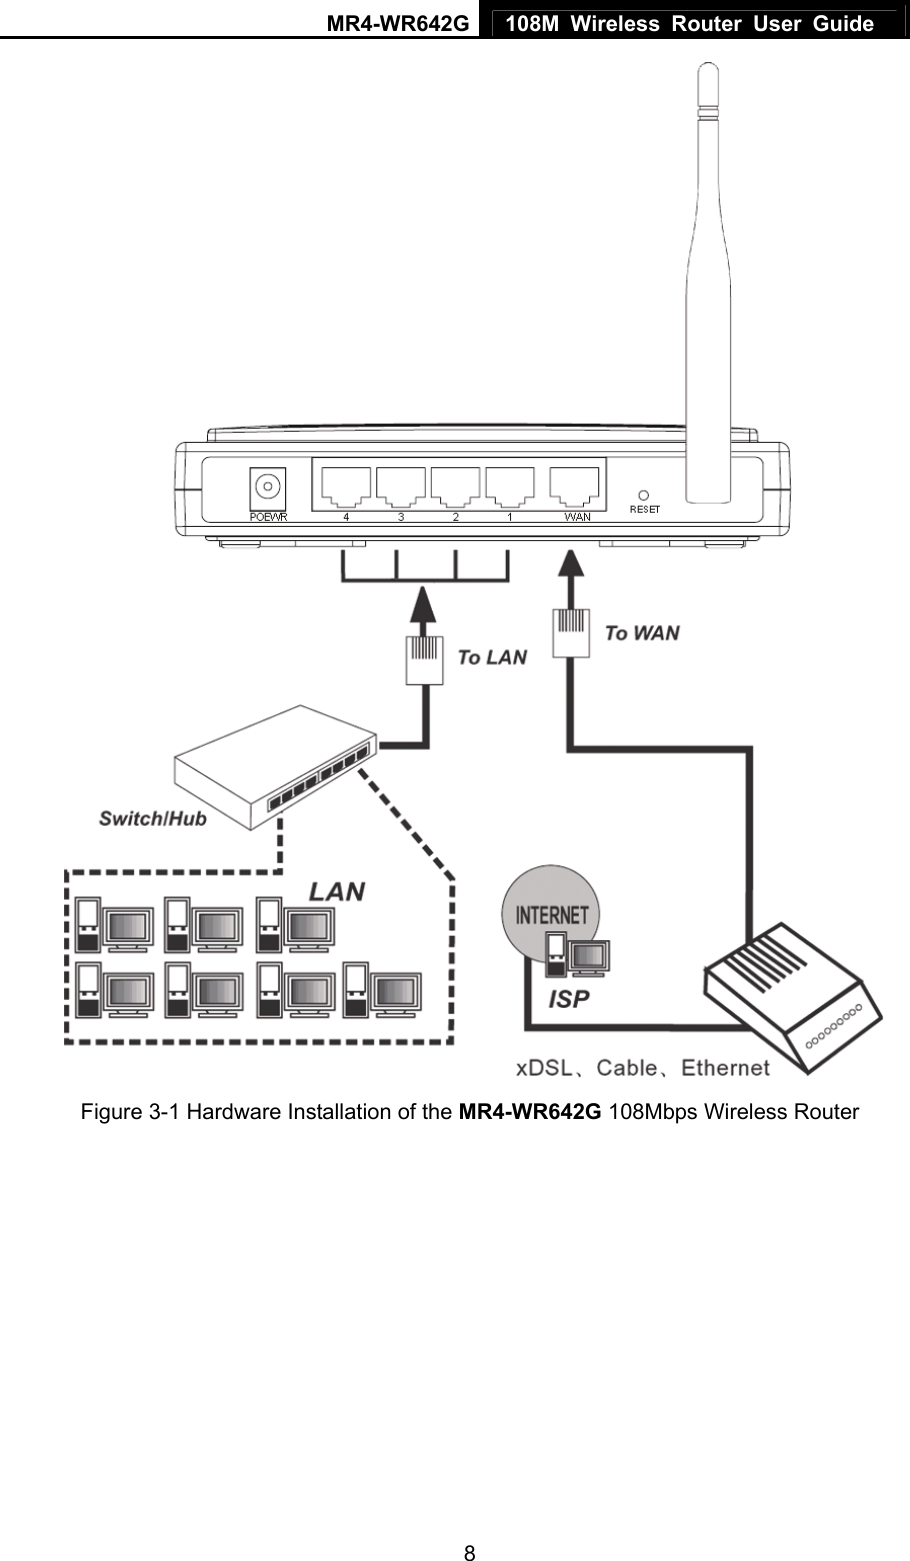 MR4-WR642G 108M Wireless Router User Guide   8 Figure 3-1 Hardware Installation of the MR4-WR642G 108Mbps Wireless Router 